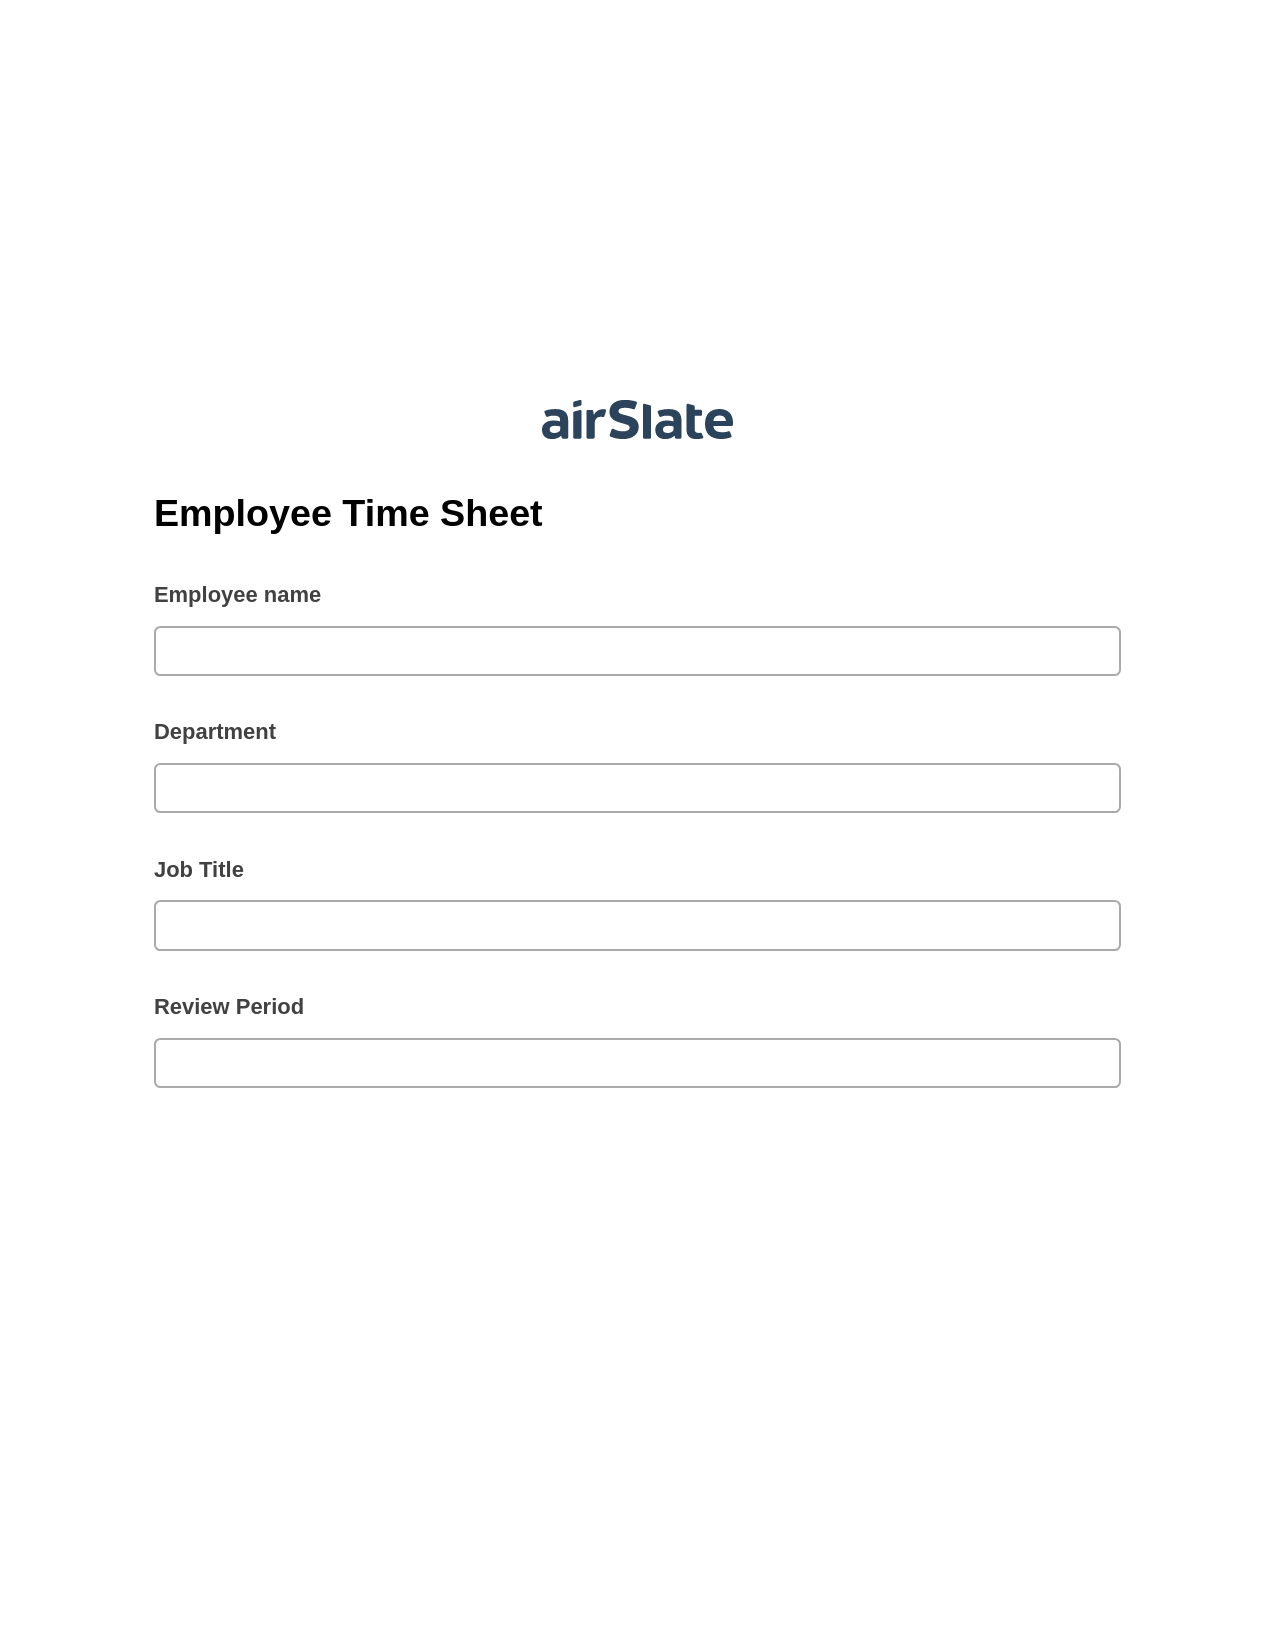 Multirole Employee Time Sheet Pre-fill from MS Dynamics 365 Records, Create slate addon, Archive to Box Bot